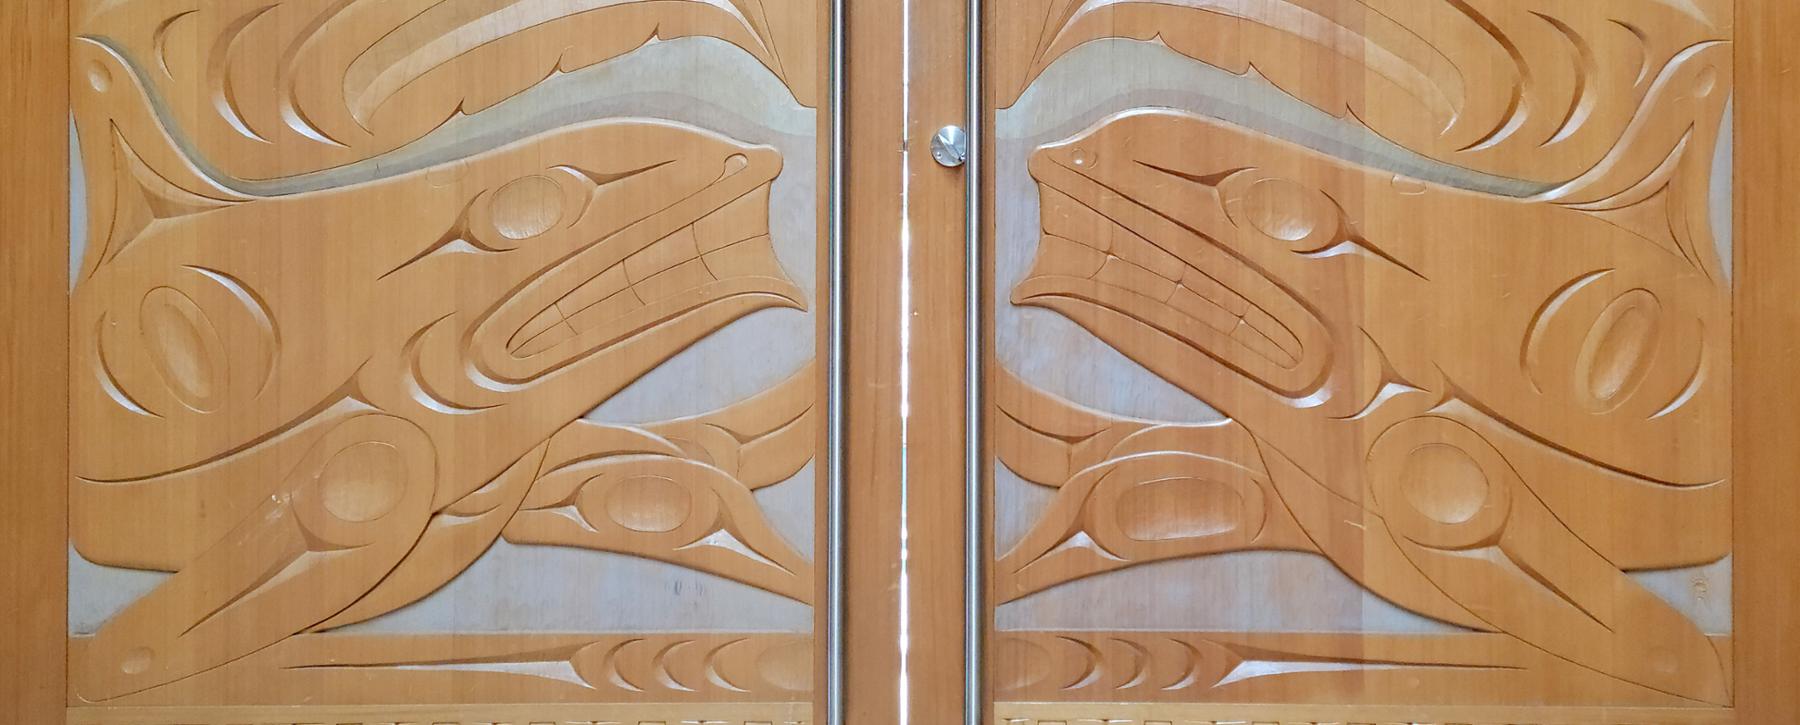 Art on doors to hall in First People House